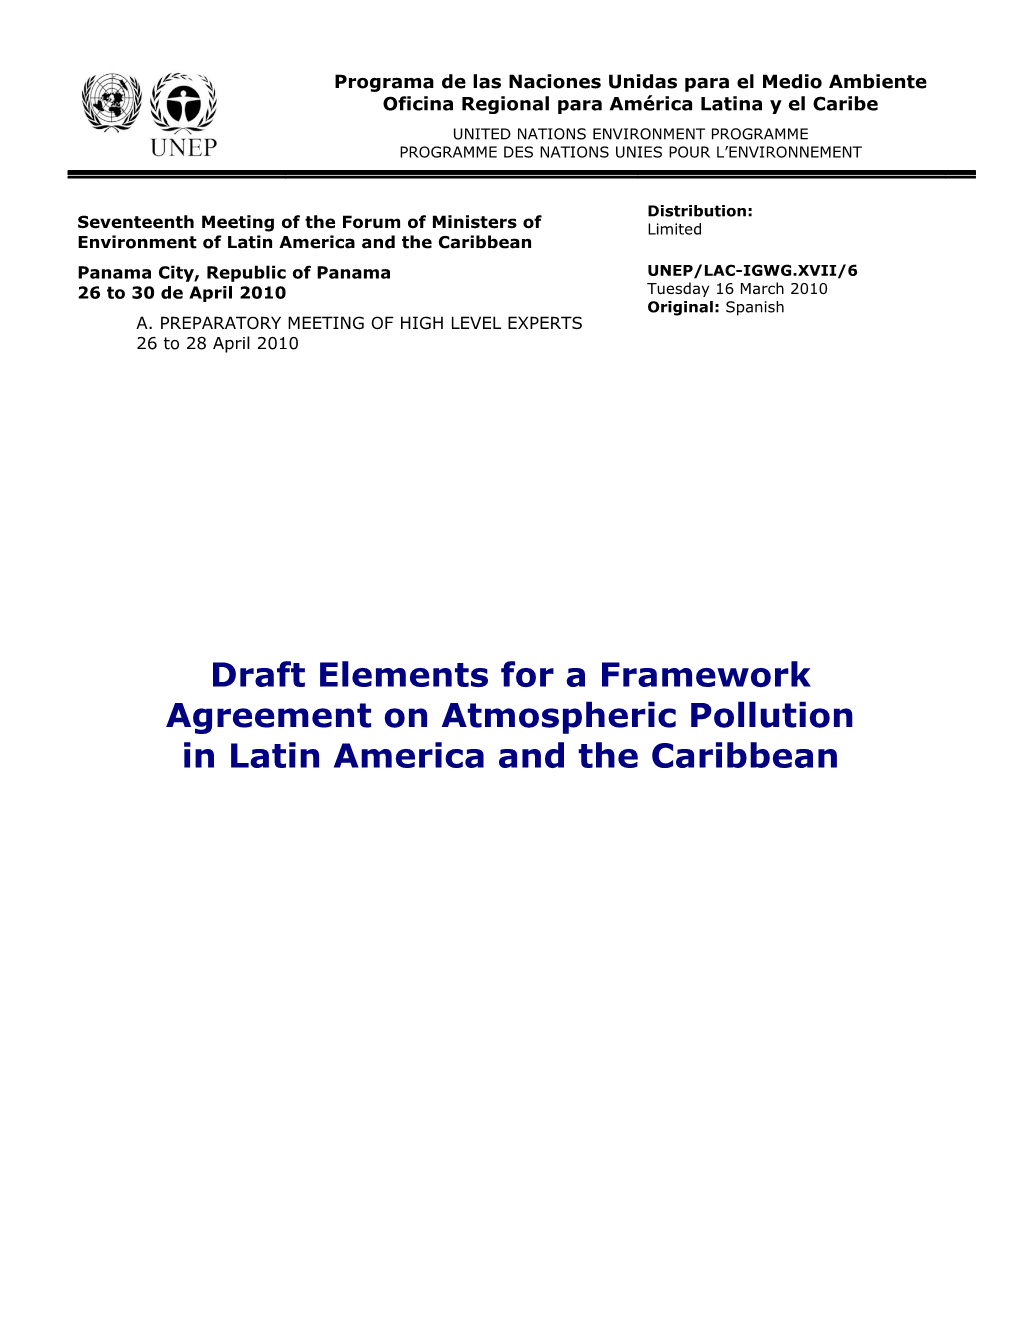 Draft Elements for a Framework Agreement on Atmospheric Pollution in Latin America And